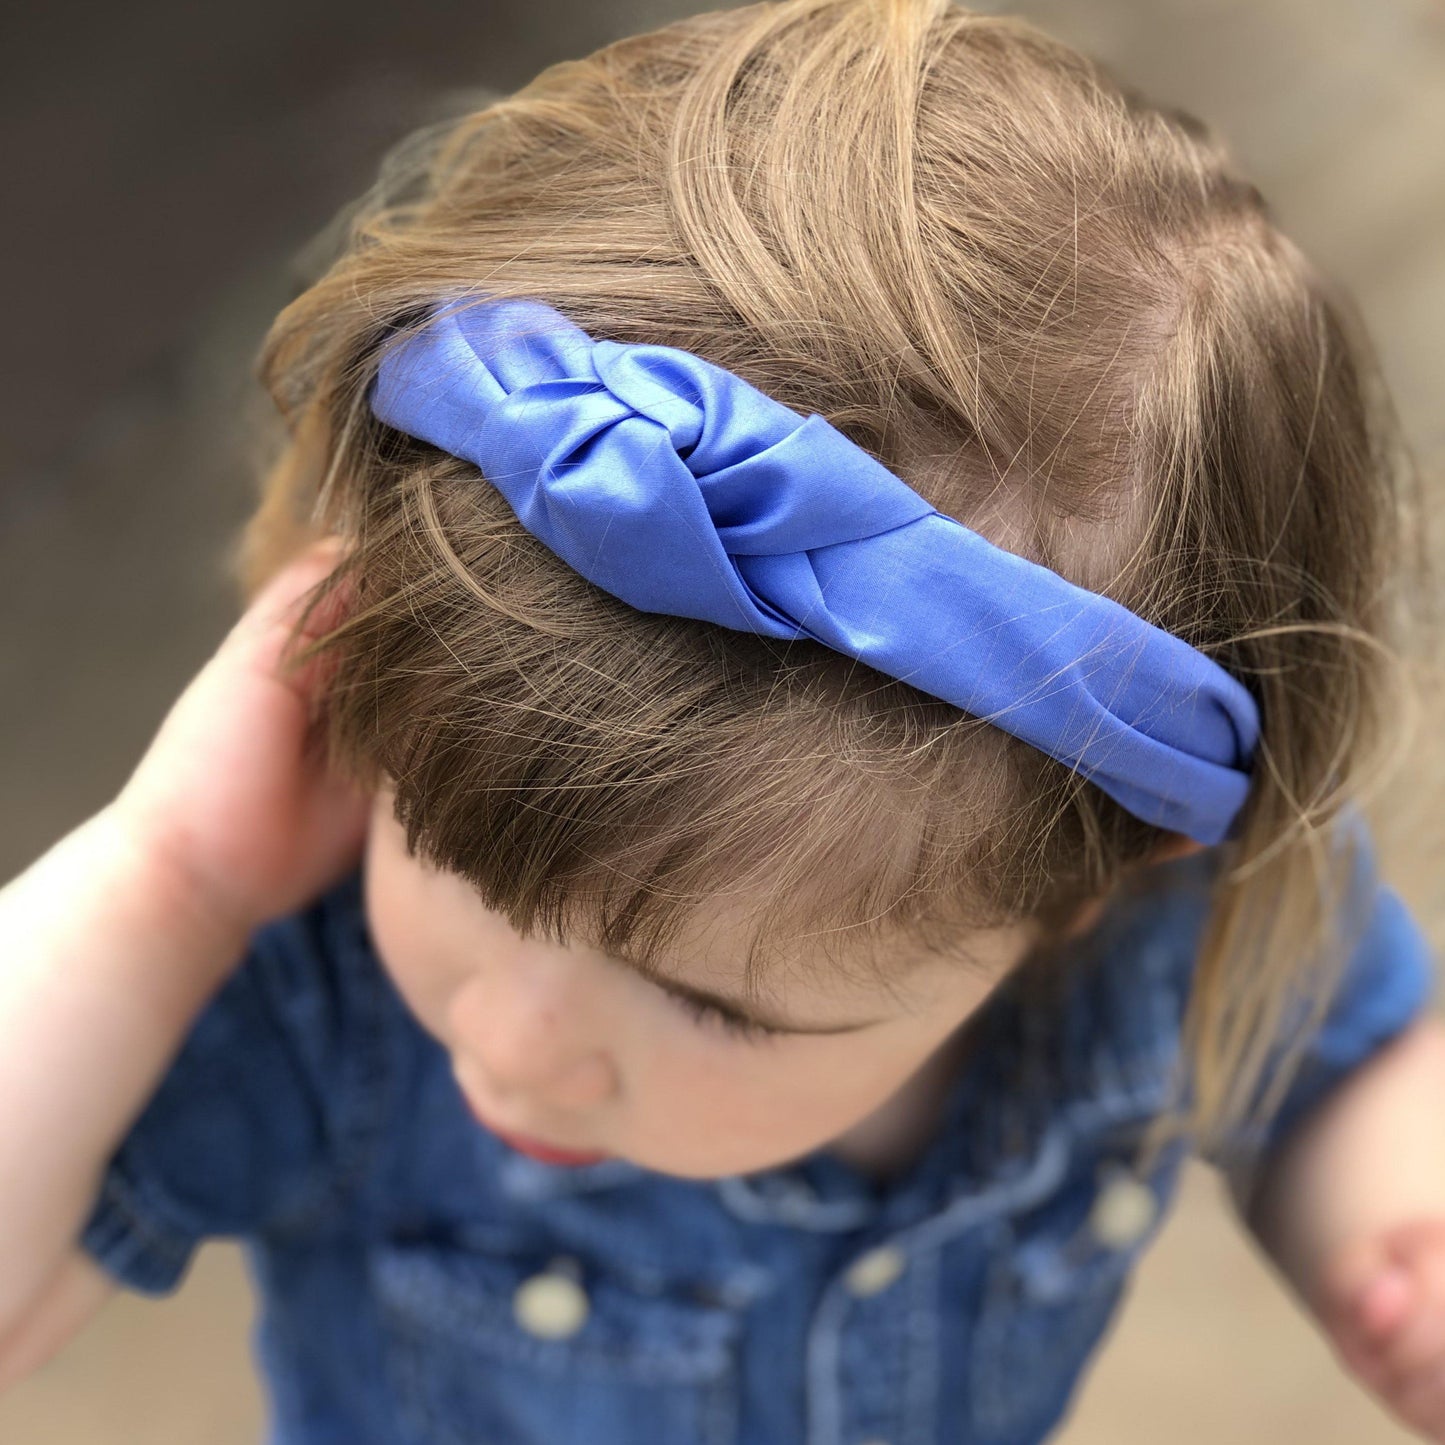 Kids Knot Alice band - Liberty of London Periwinkle blue blue